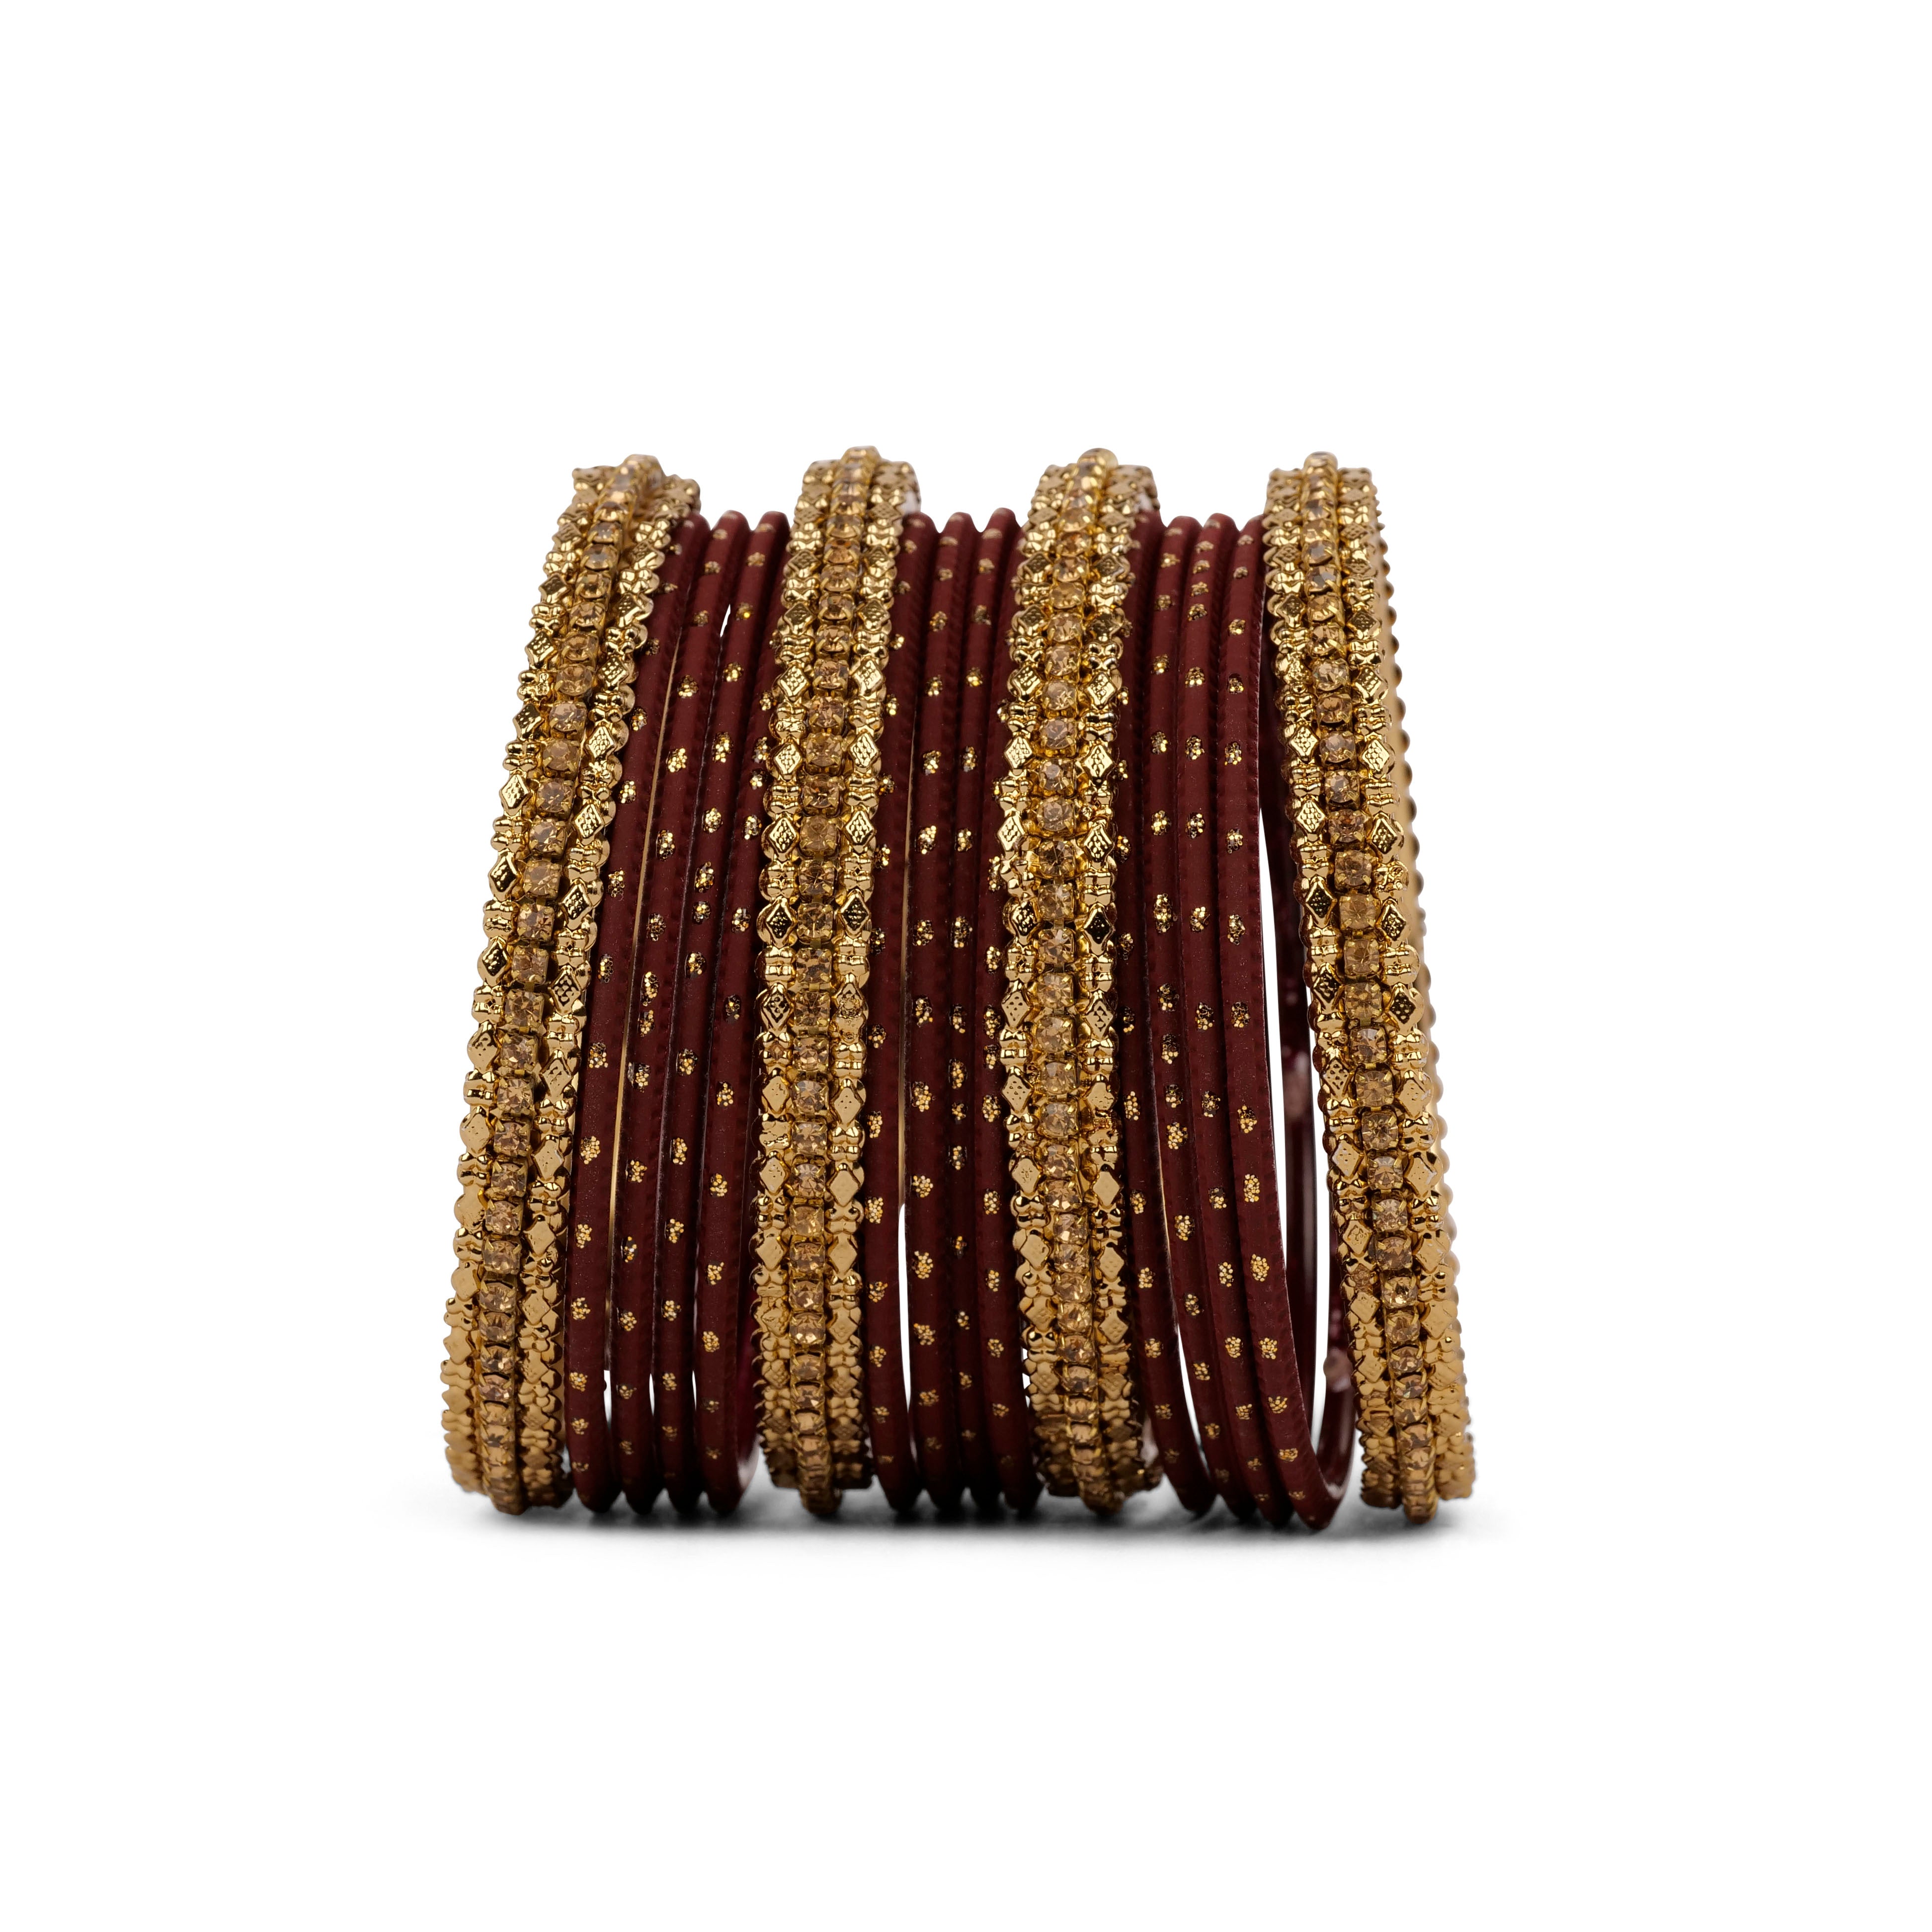 Simple Bangle Set in Maroon and Antique Gold